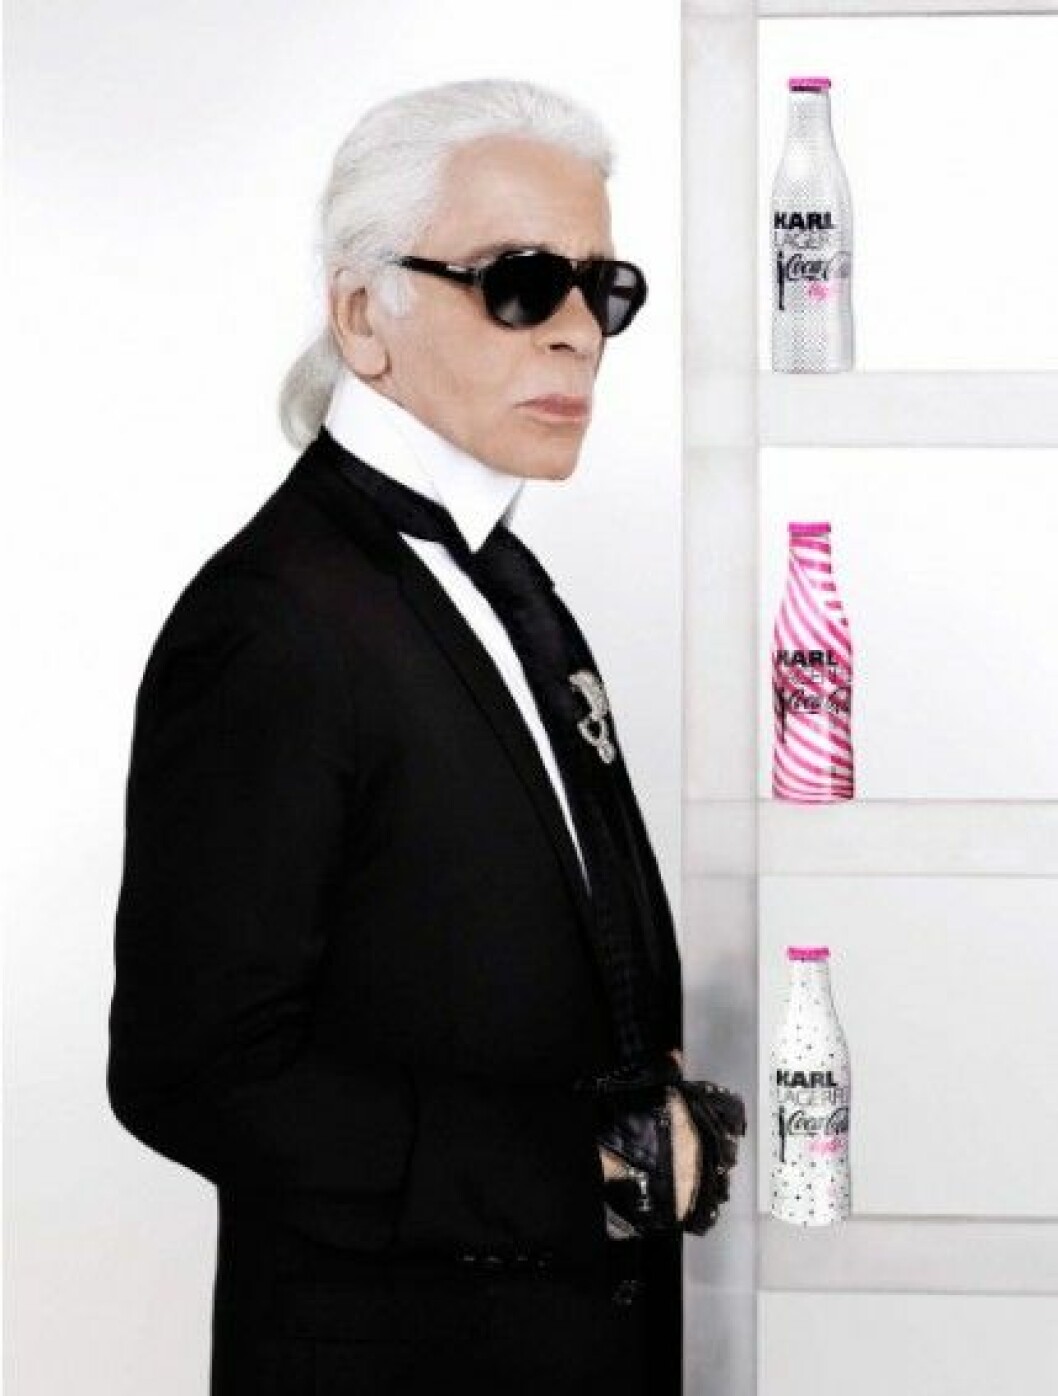 Coca-Cola light Limited Edition Collection by Karl Lagerfeld.